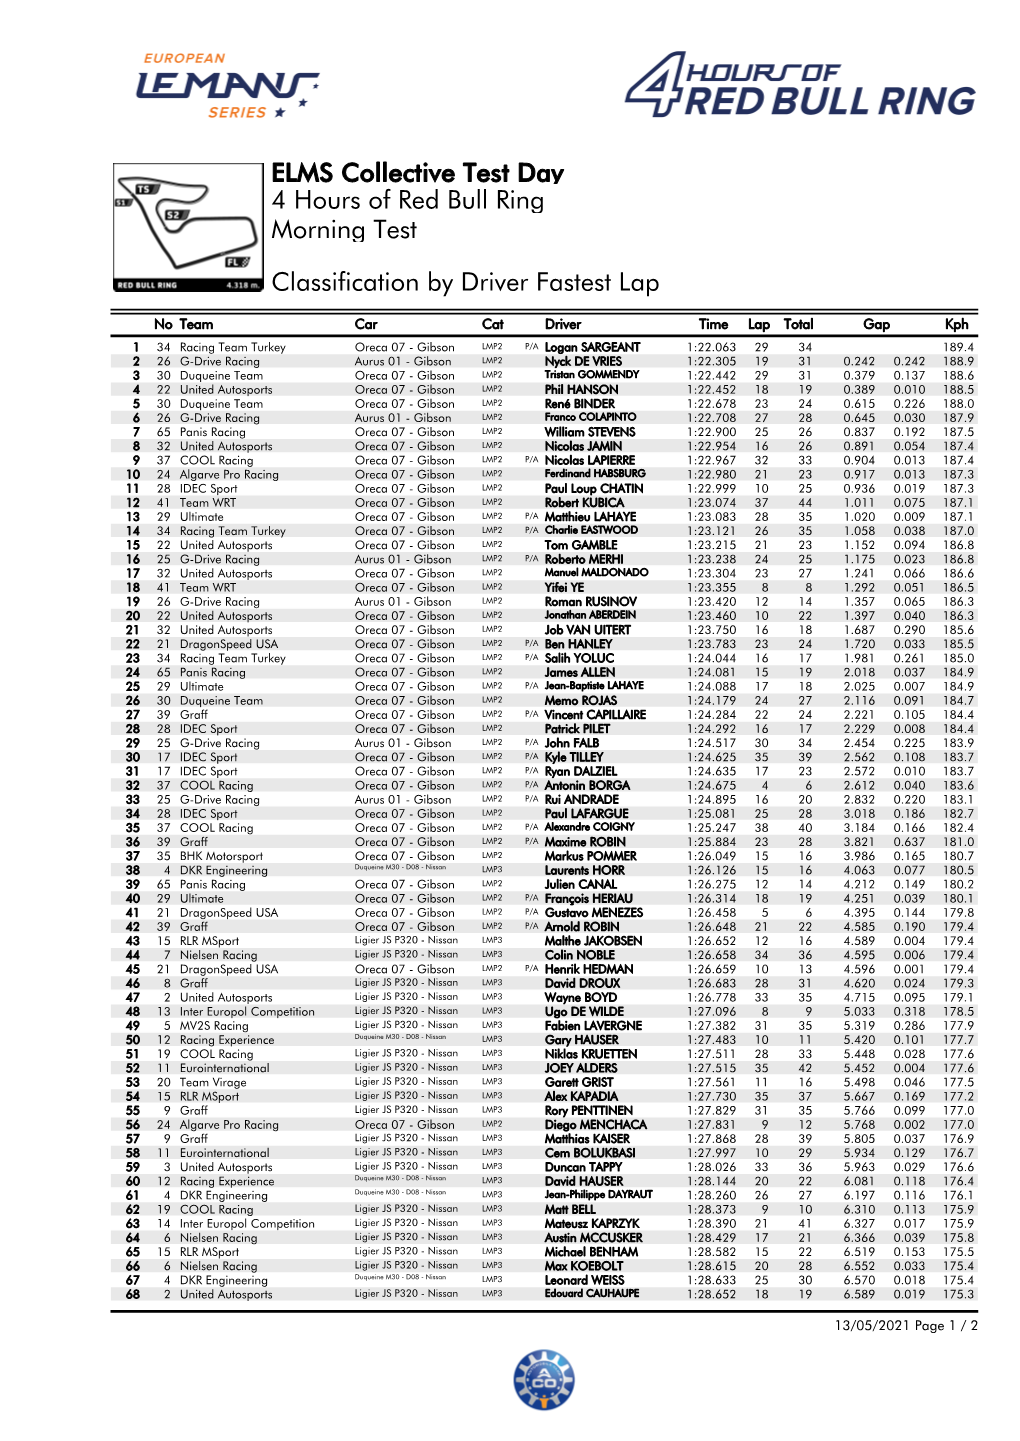 Classification by Driver Fastest Lap Morning Test 4